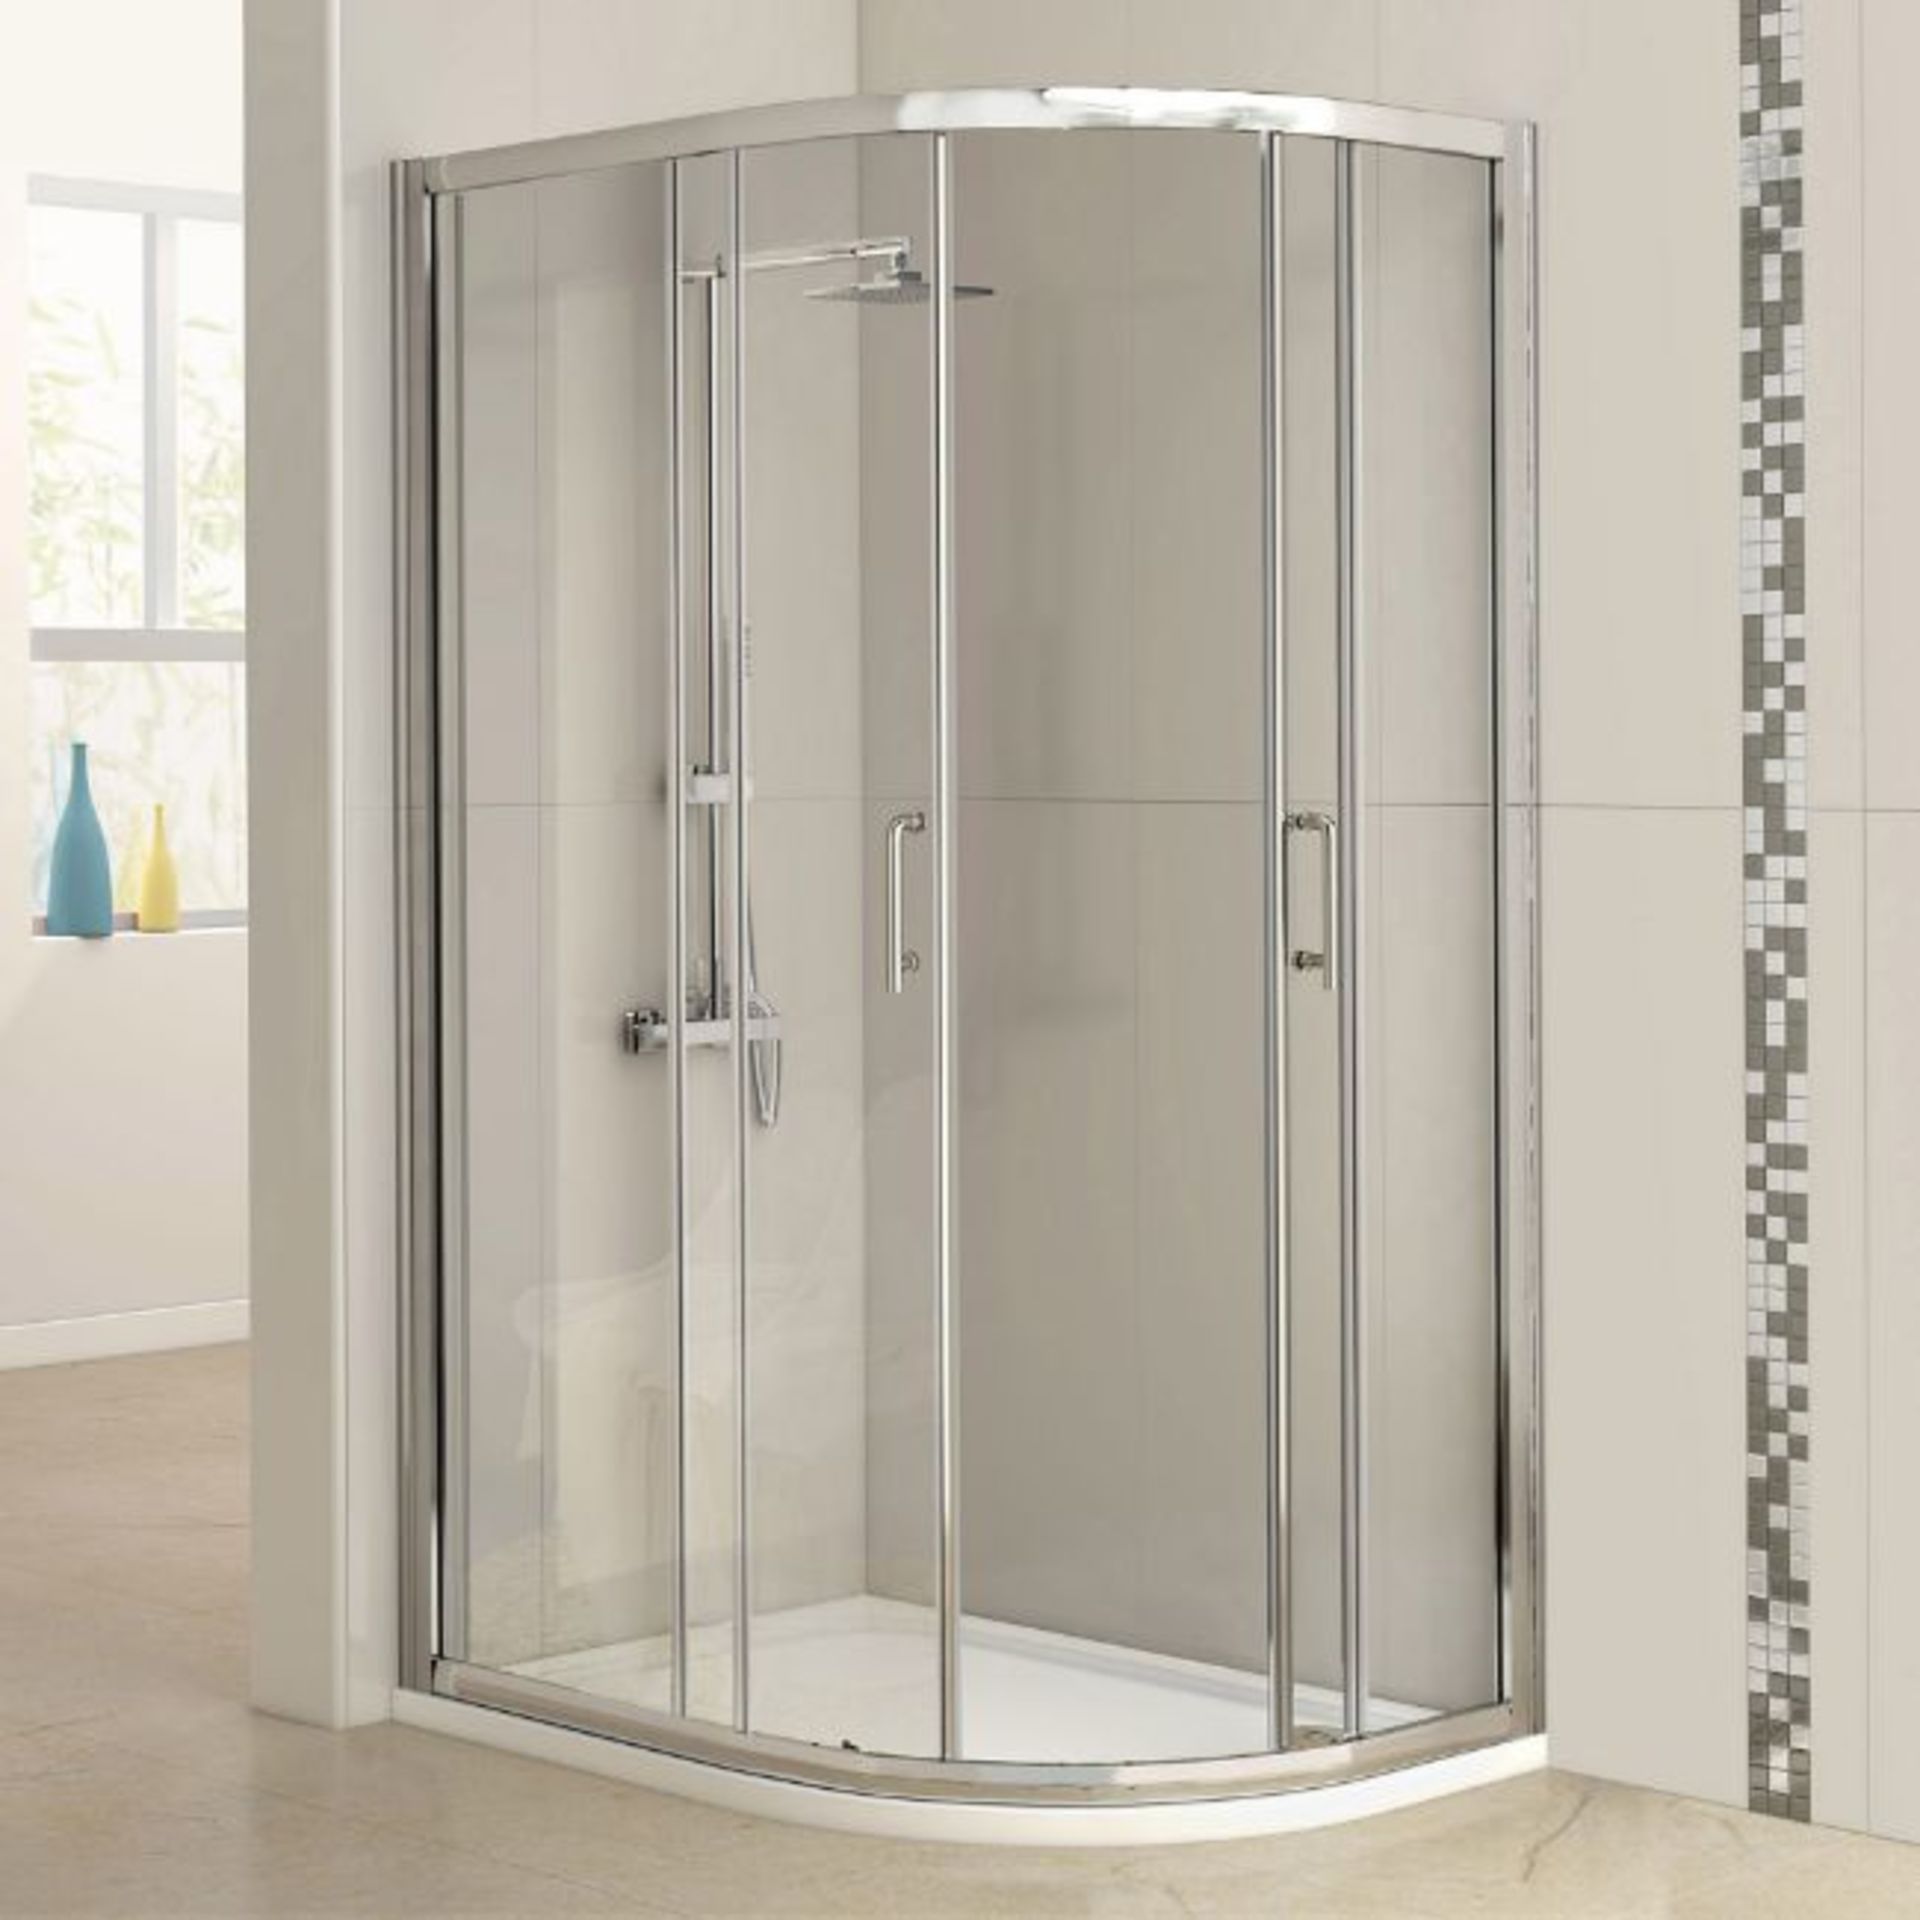 New Twyfords 1200X900mm - 6mm - Offset Quadrant Shower Enclosure. Rrp £599.99.Make The Most Of... - Image 3 of 3